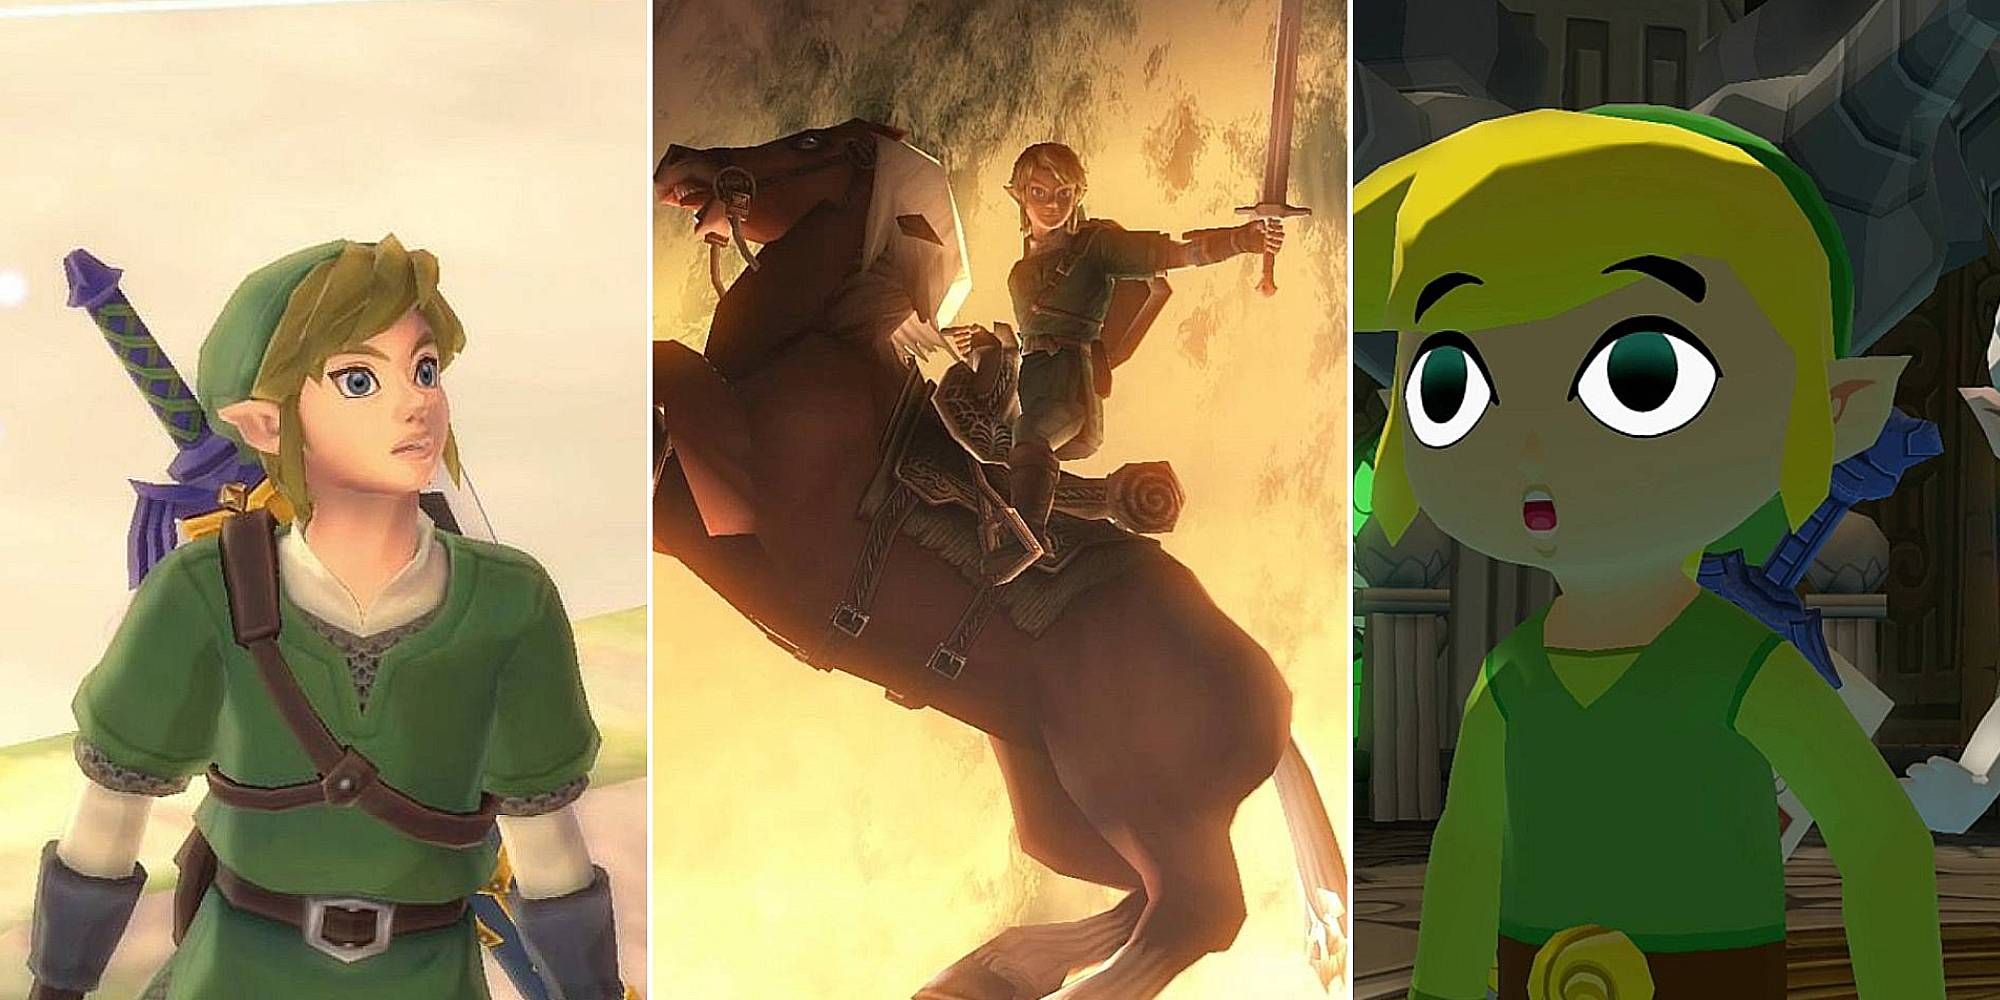 A collage of images featuring Link in a green tunic, Link riding a horse with fire in the background and Toon Link